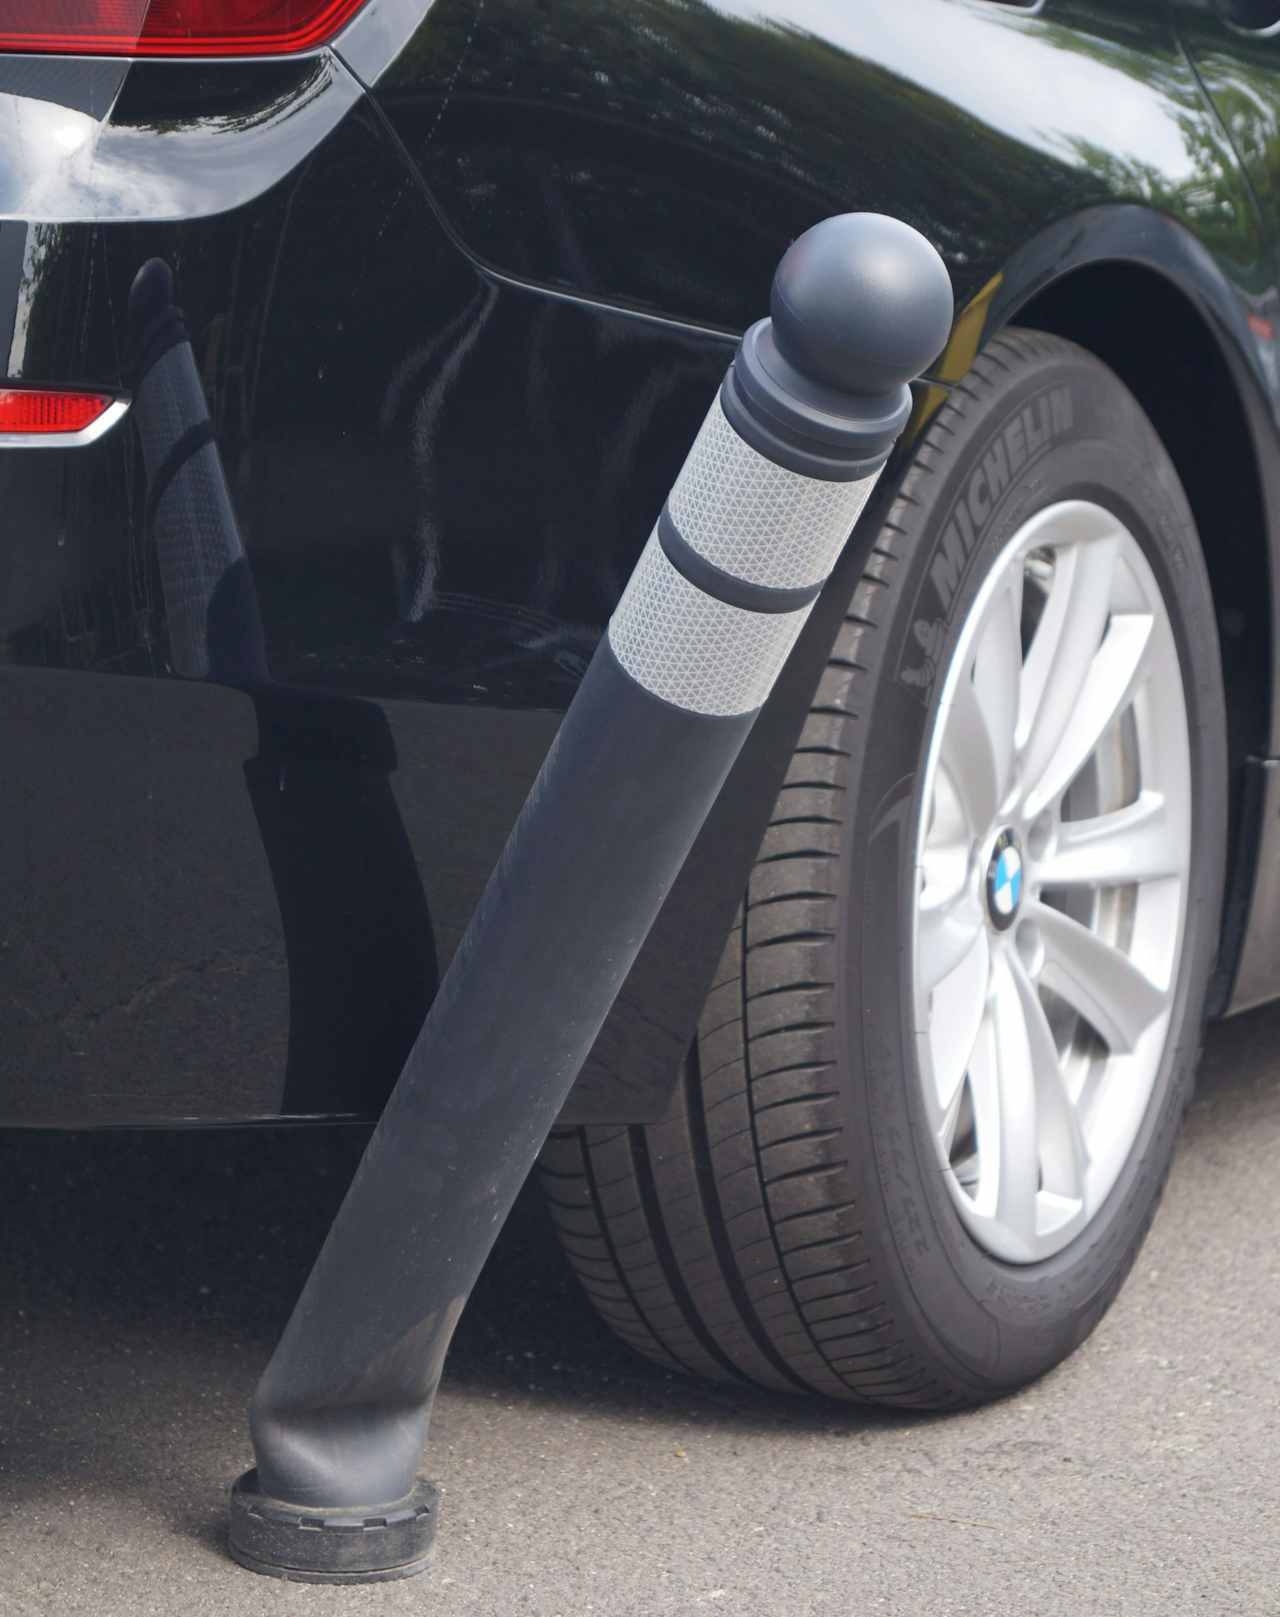 recycled rubber bollards